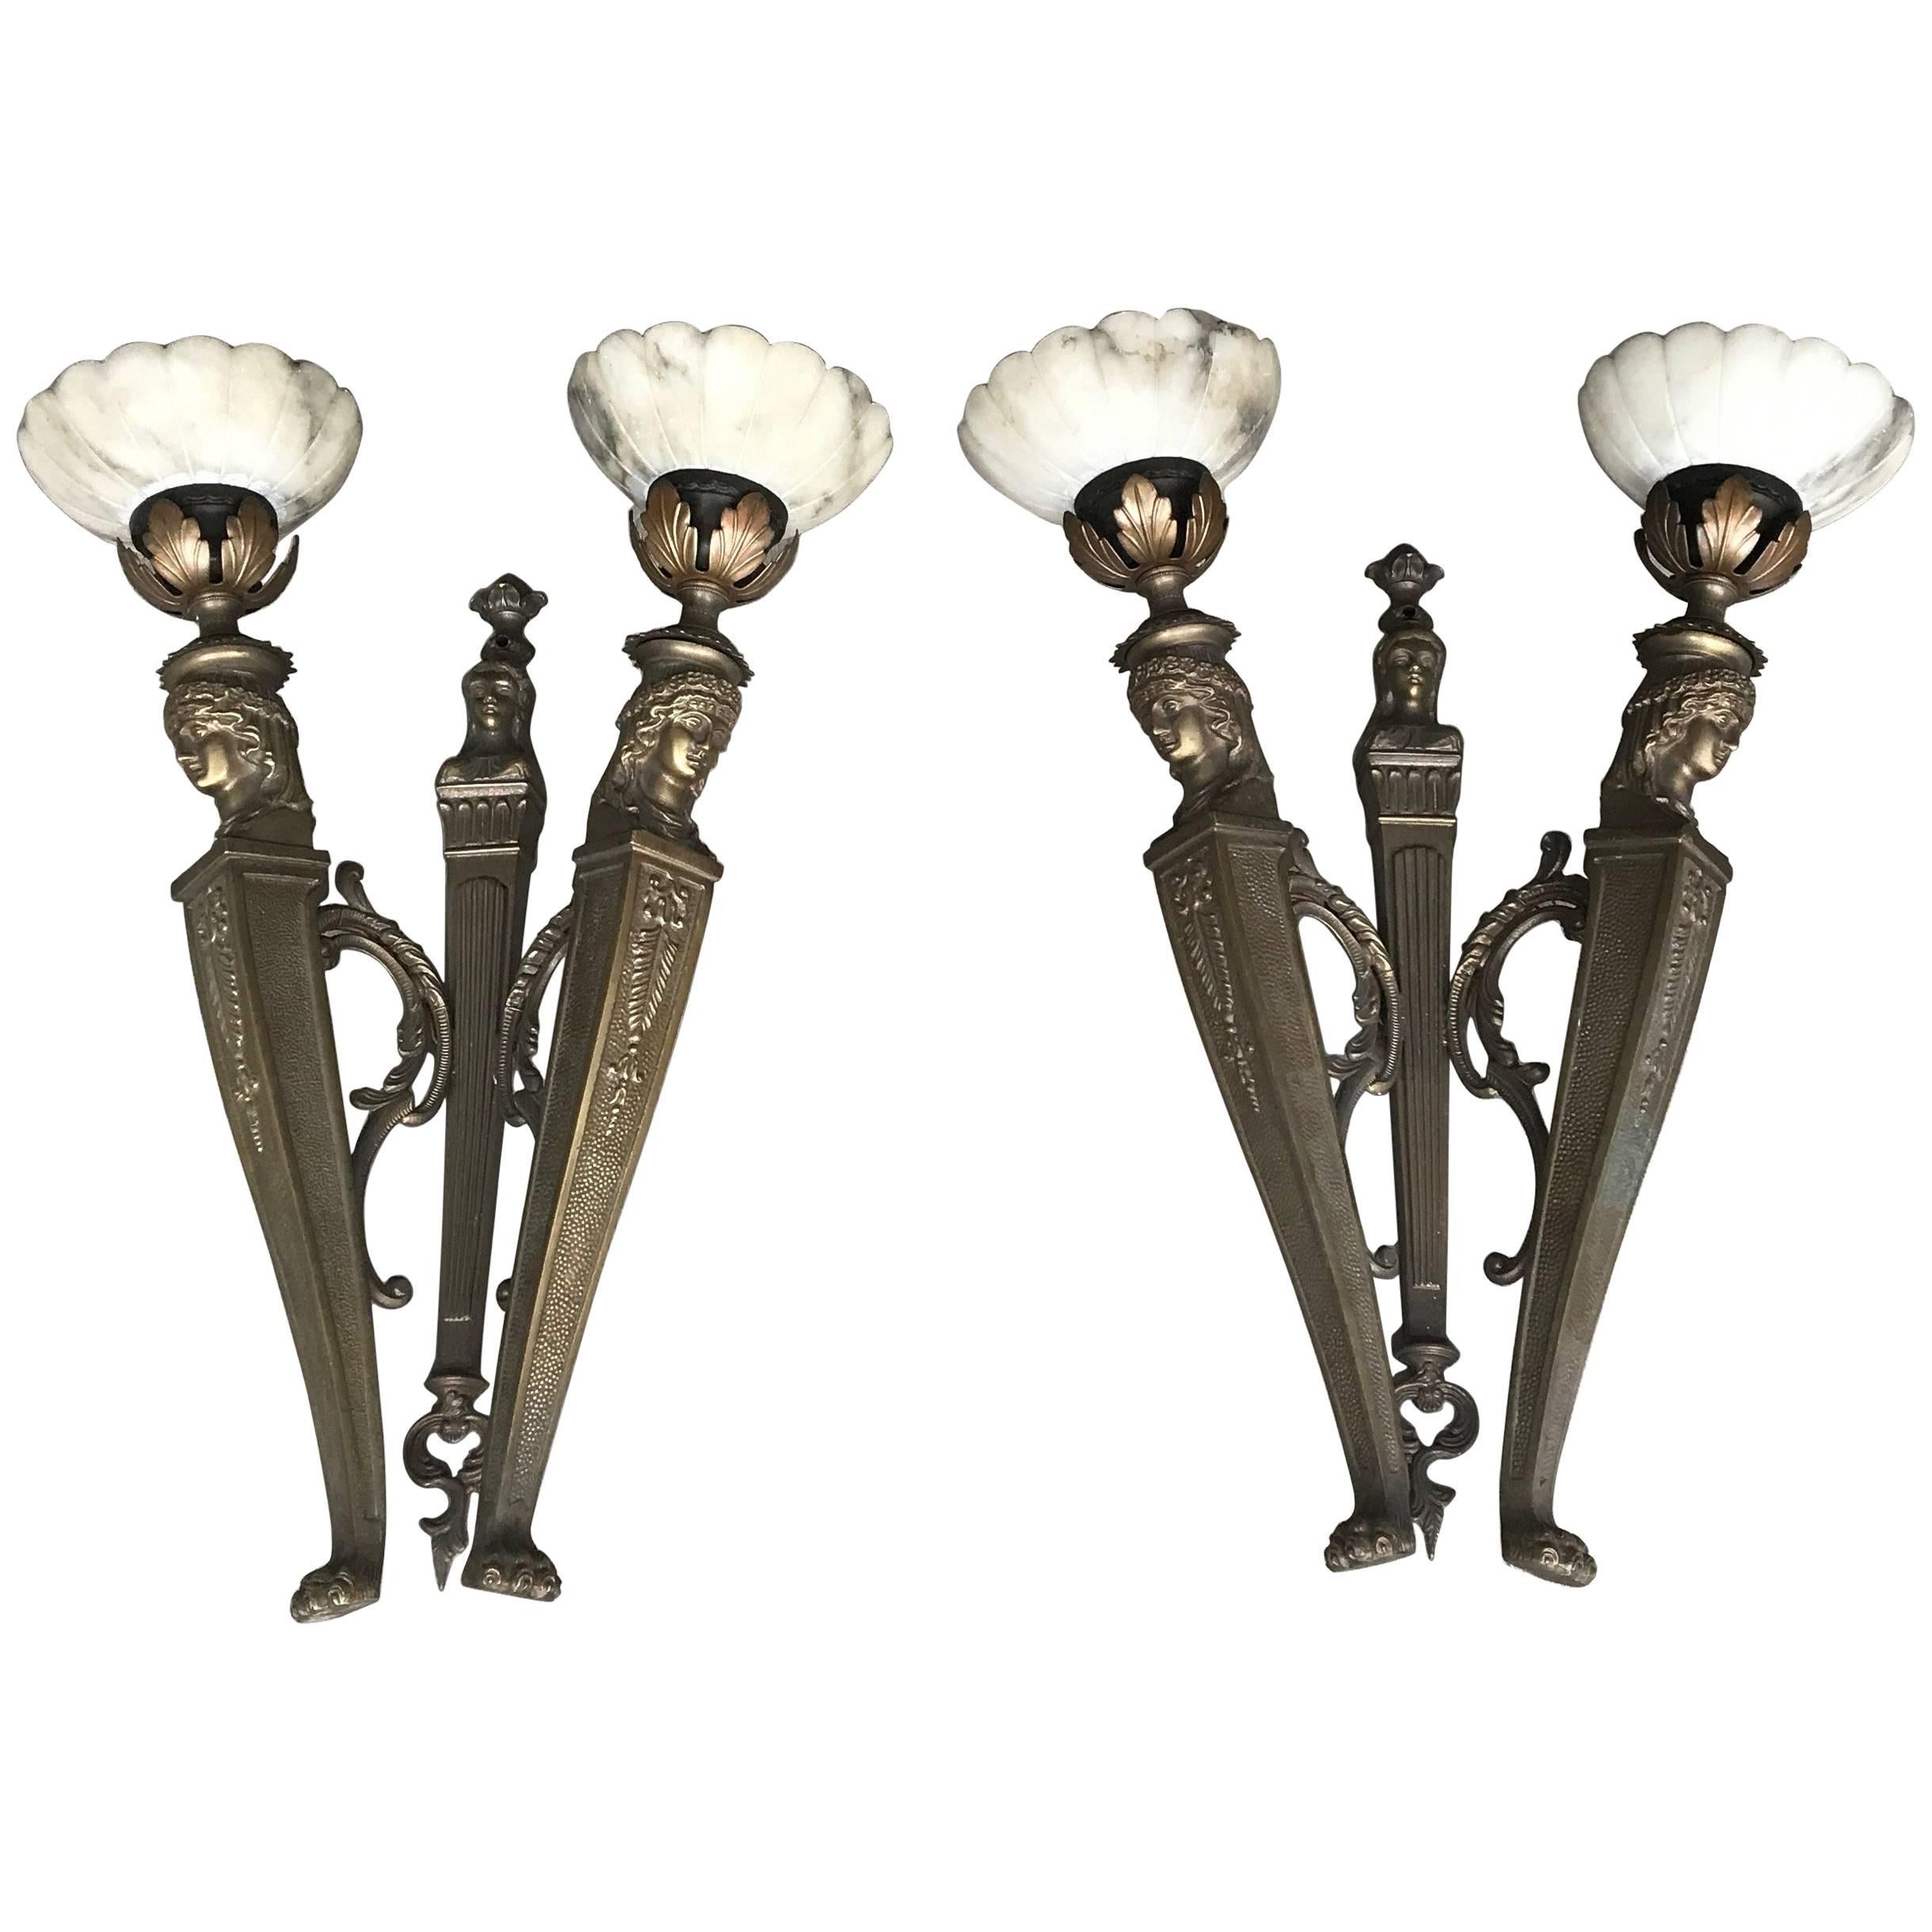 Stunning Pair of Egyptian Revival Bronze Wall Sconces with Alabaster Shades